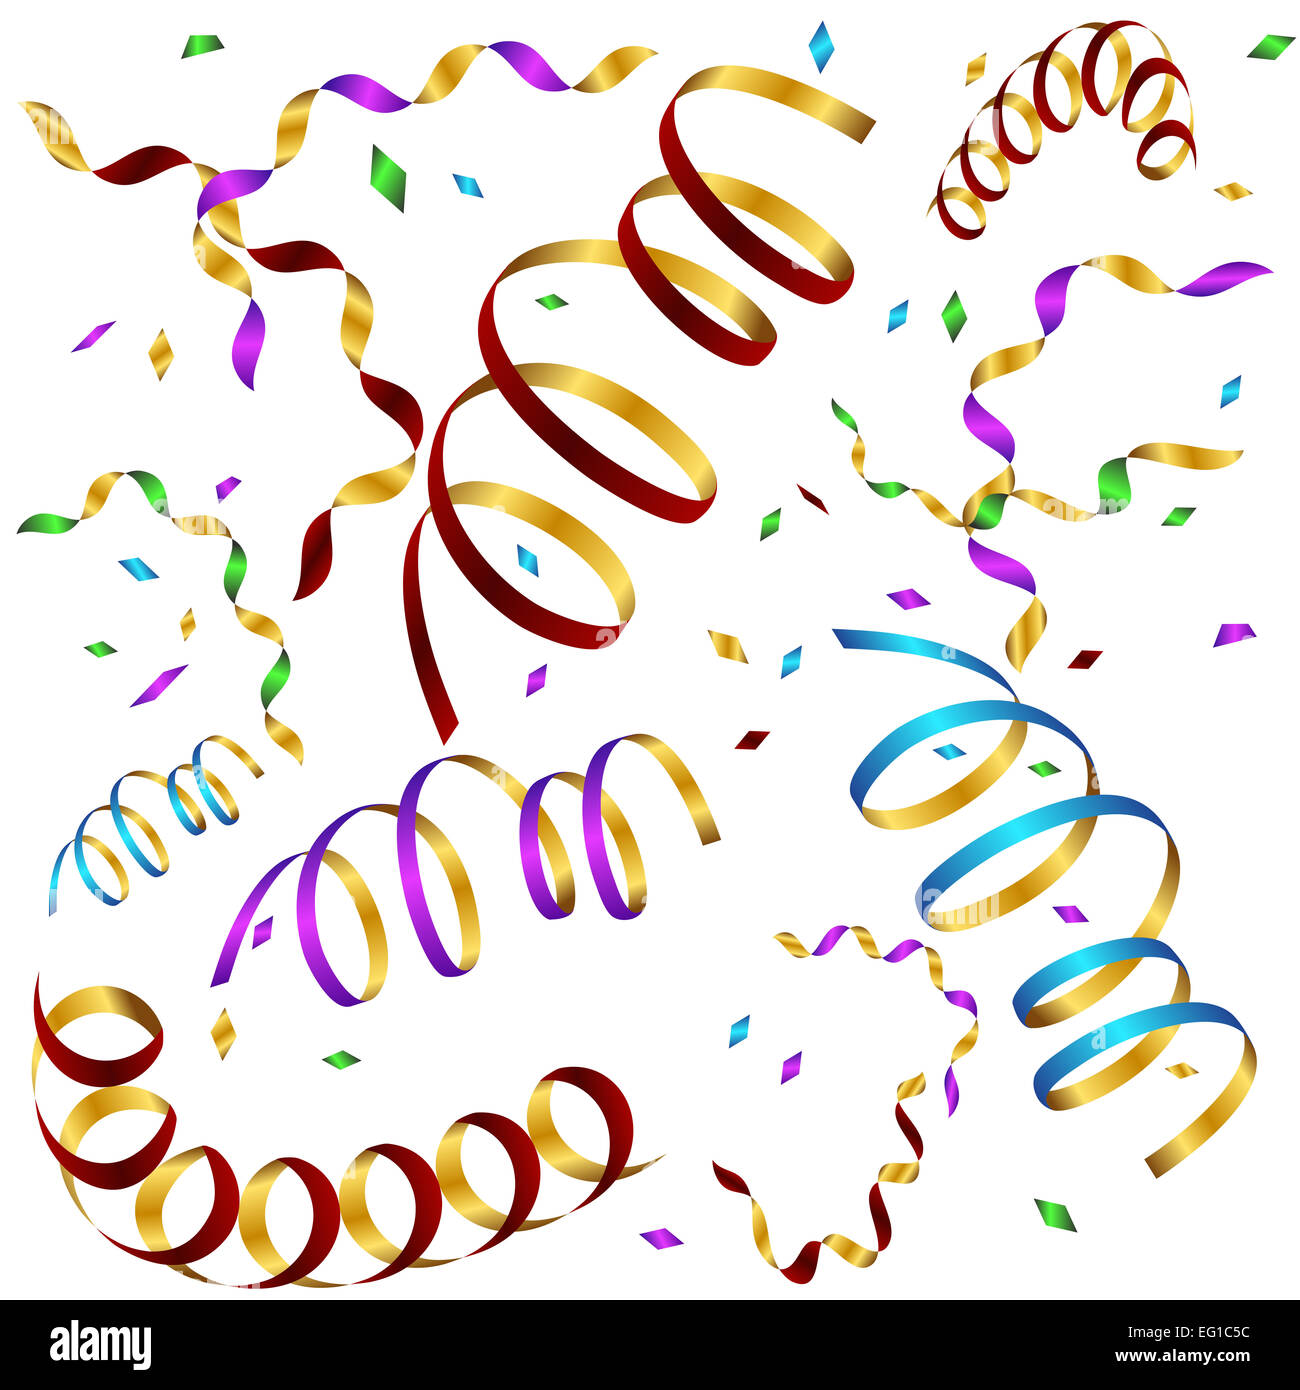 An image of falling color confetti and curled ribbons. Stock Photo